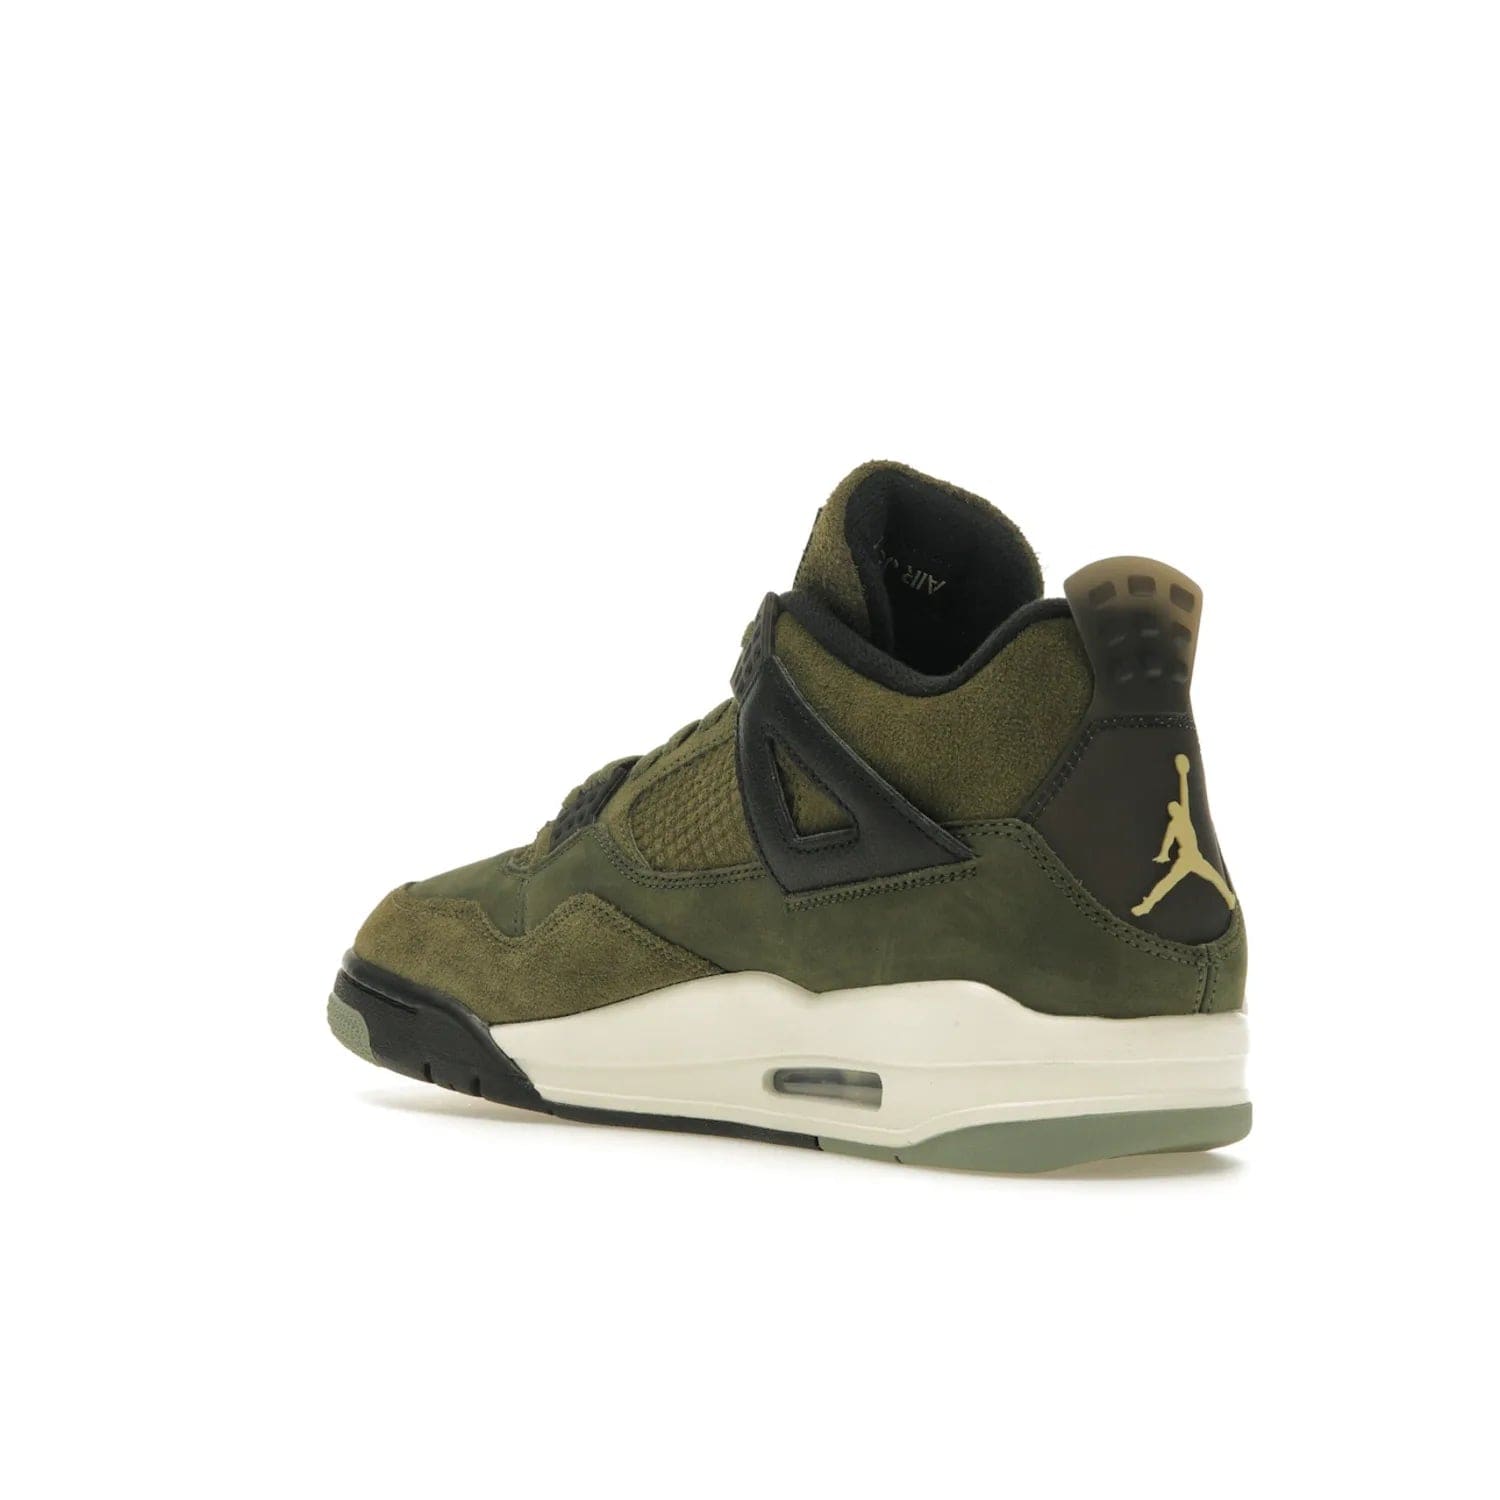 Jordan 4 Retro SE Craft Medium Olive - Image 24 - Only at www.BallersClubKickz.com - Grab the Jordan 4 Retro SE Crafts for a unique style. Combines Medium Olive, Pale Vanilla, Khaki, Black and Sail, with same classic shape, cushioning, and rubber outsole. Available on November 18th!